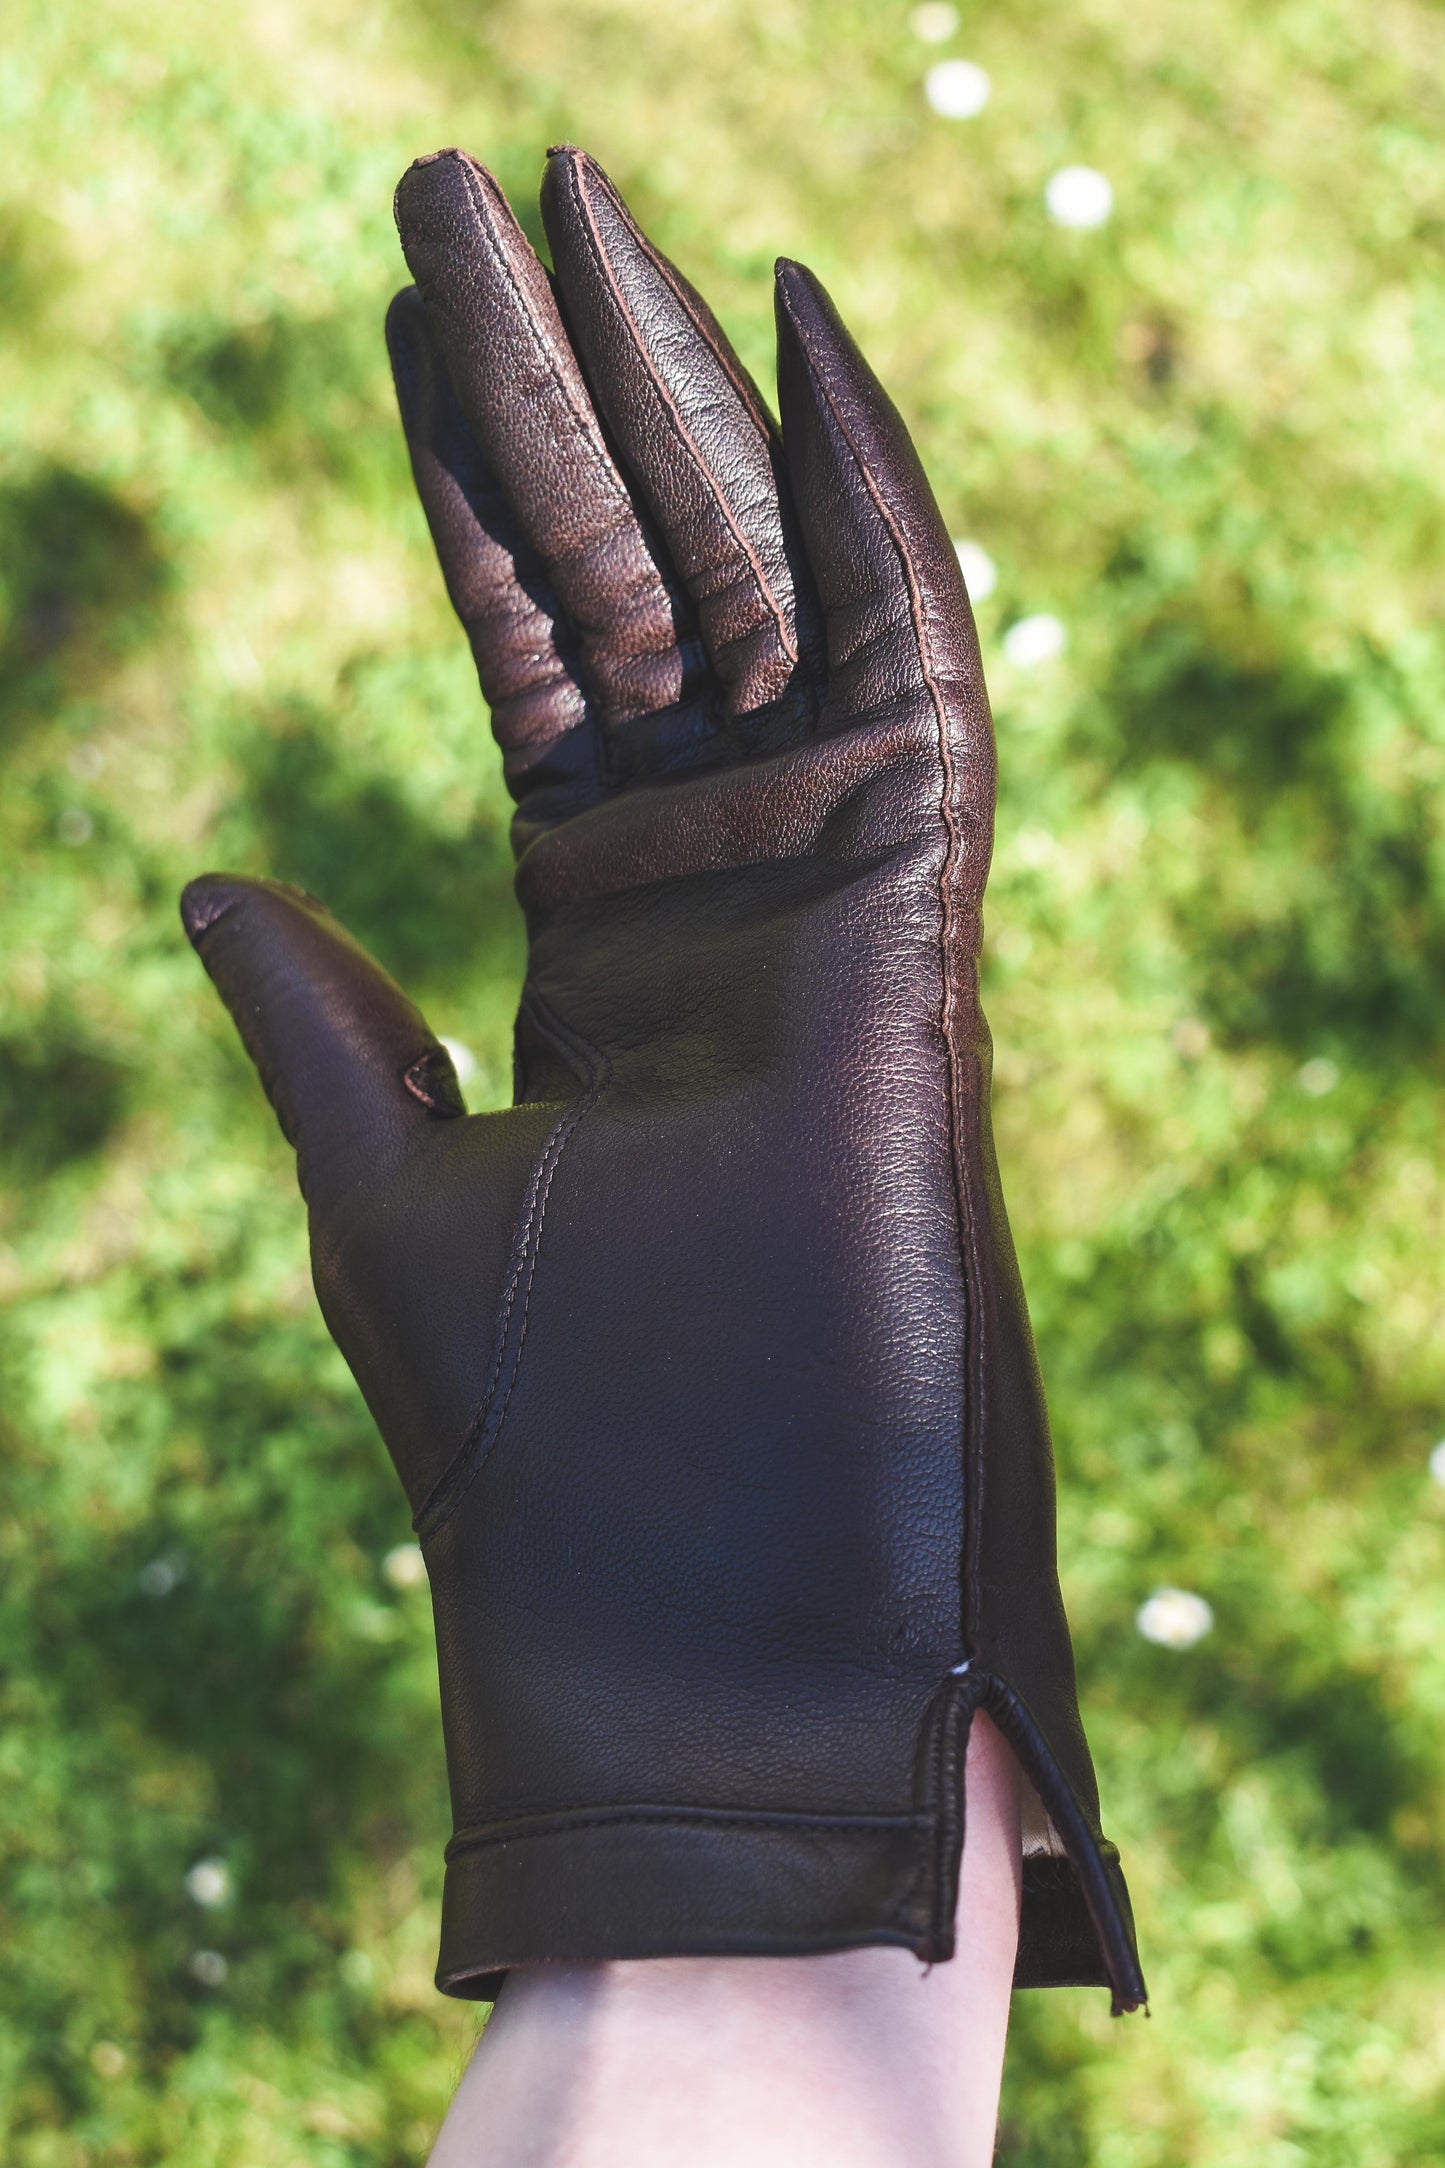 NEW IN! Leather gloves